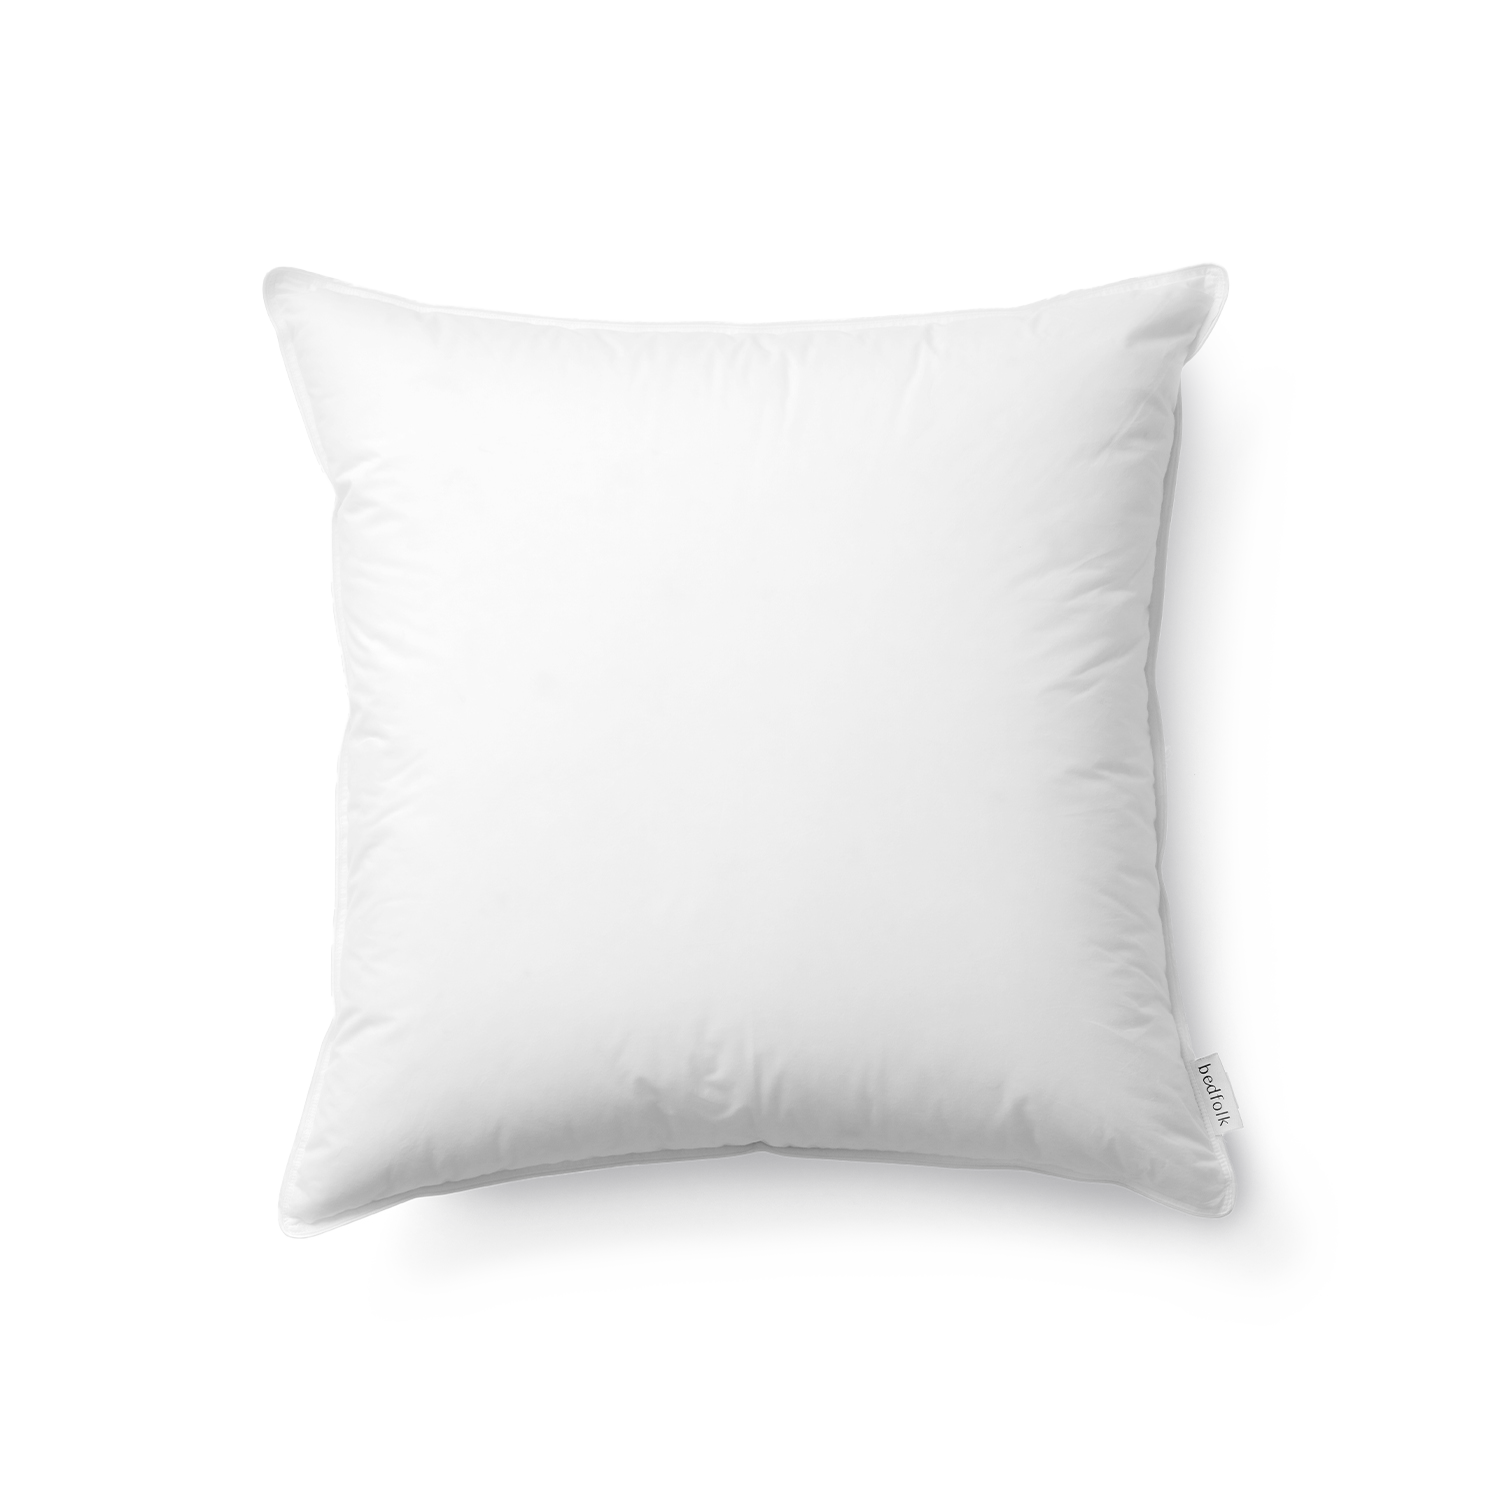 The Down Pillow